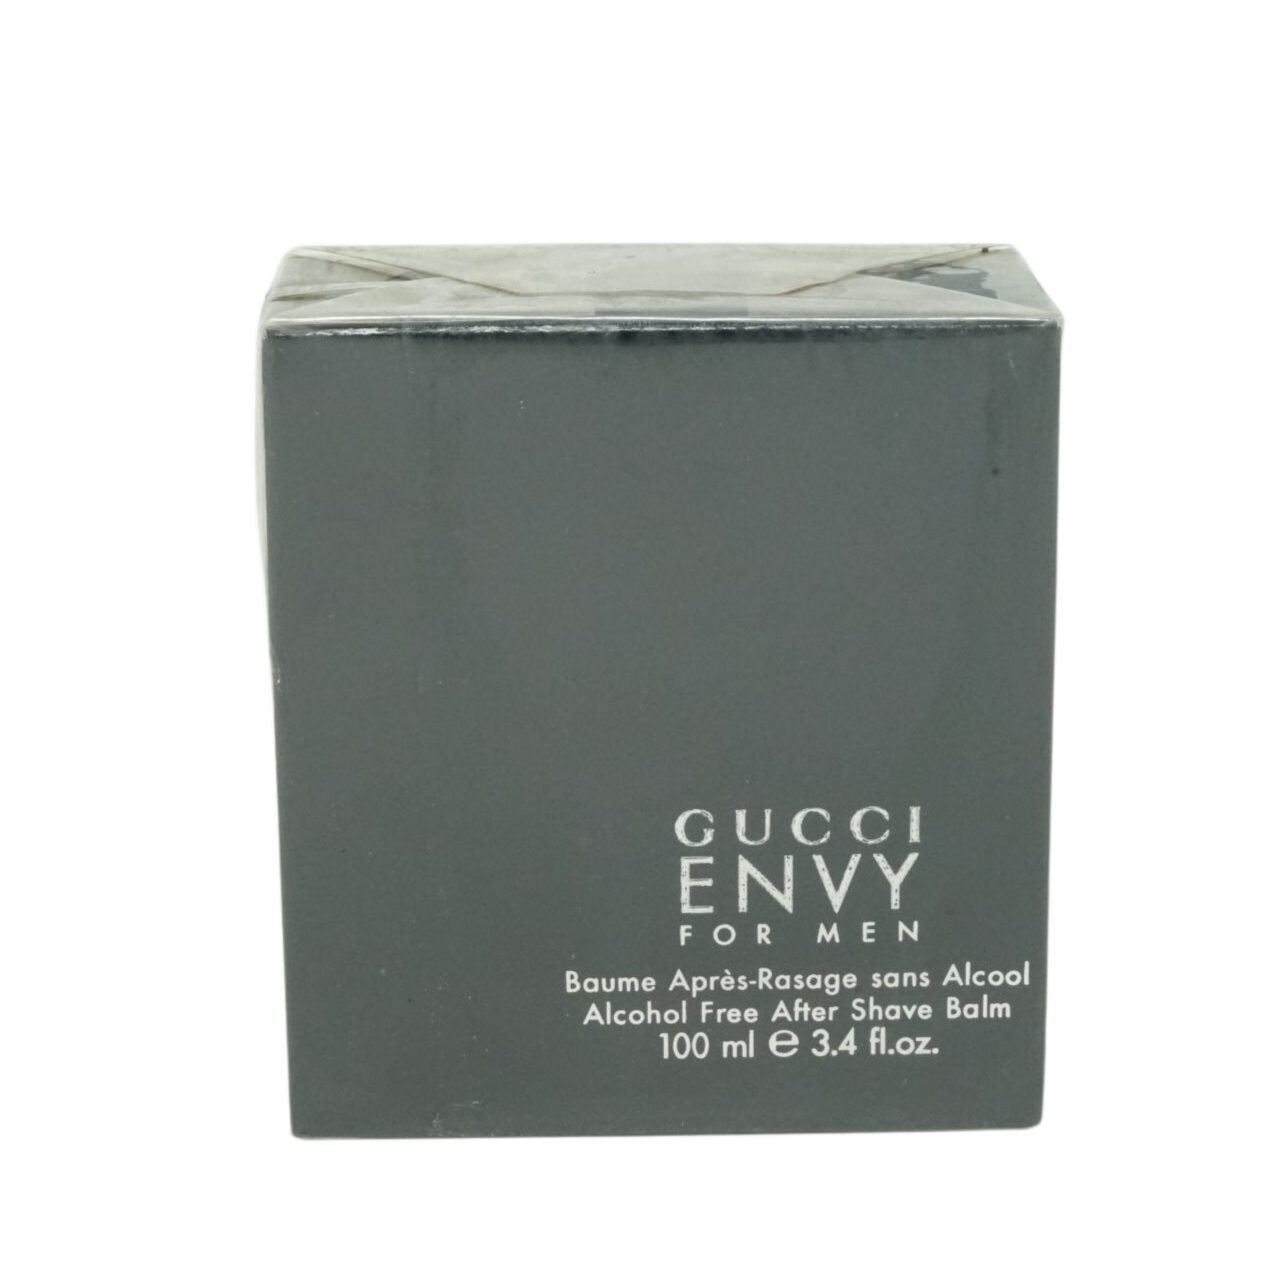 GUCCI After-Shave Balsam Gucci Envy Shave Frei Balm After 100ml Alkohol